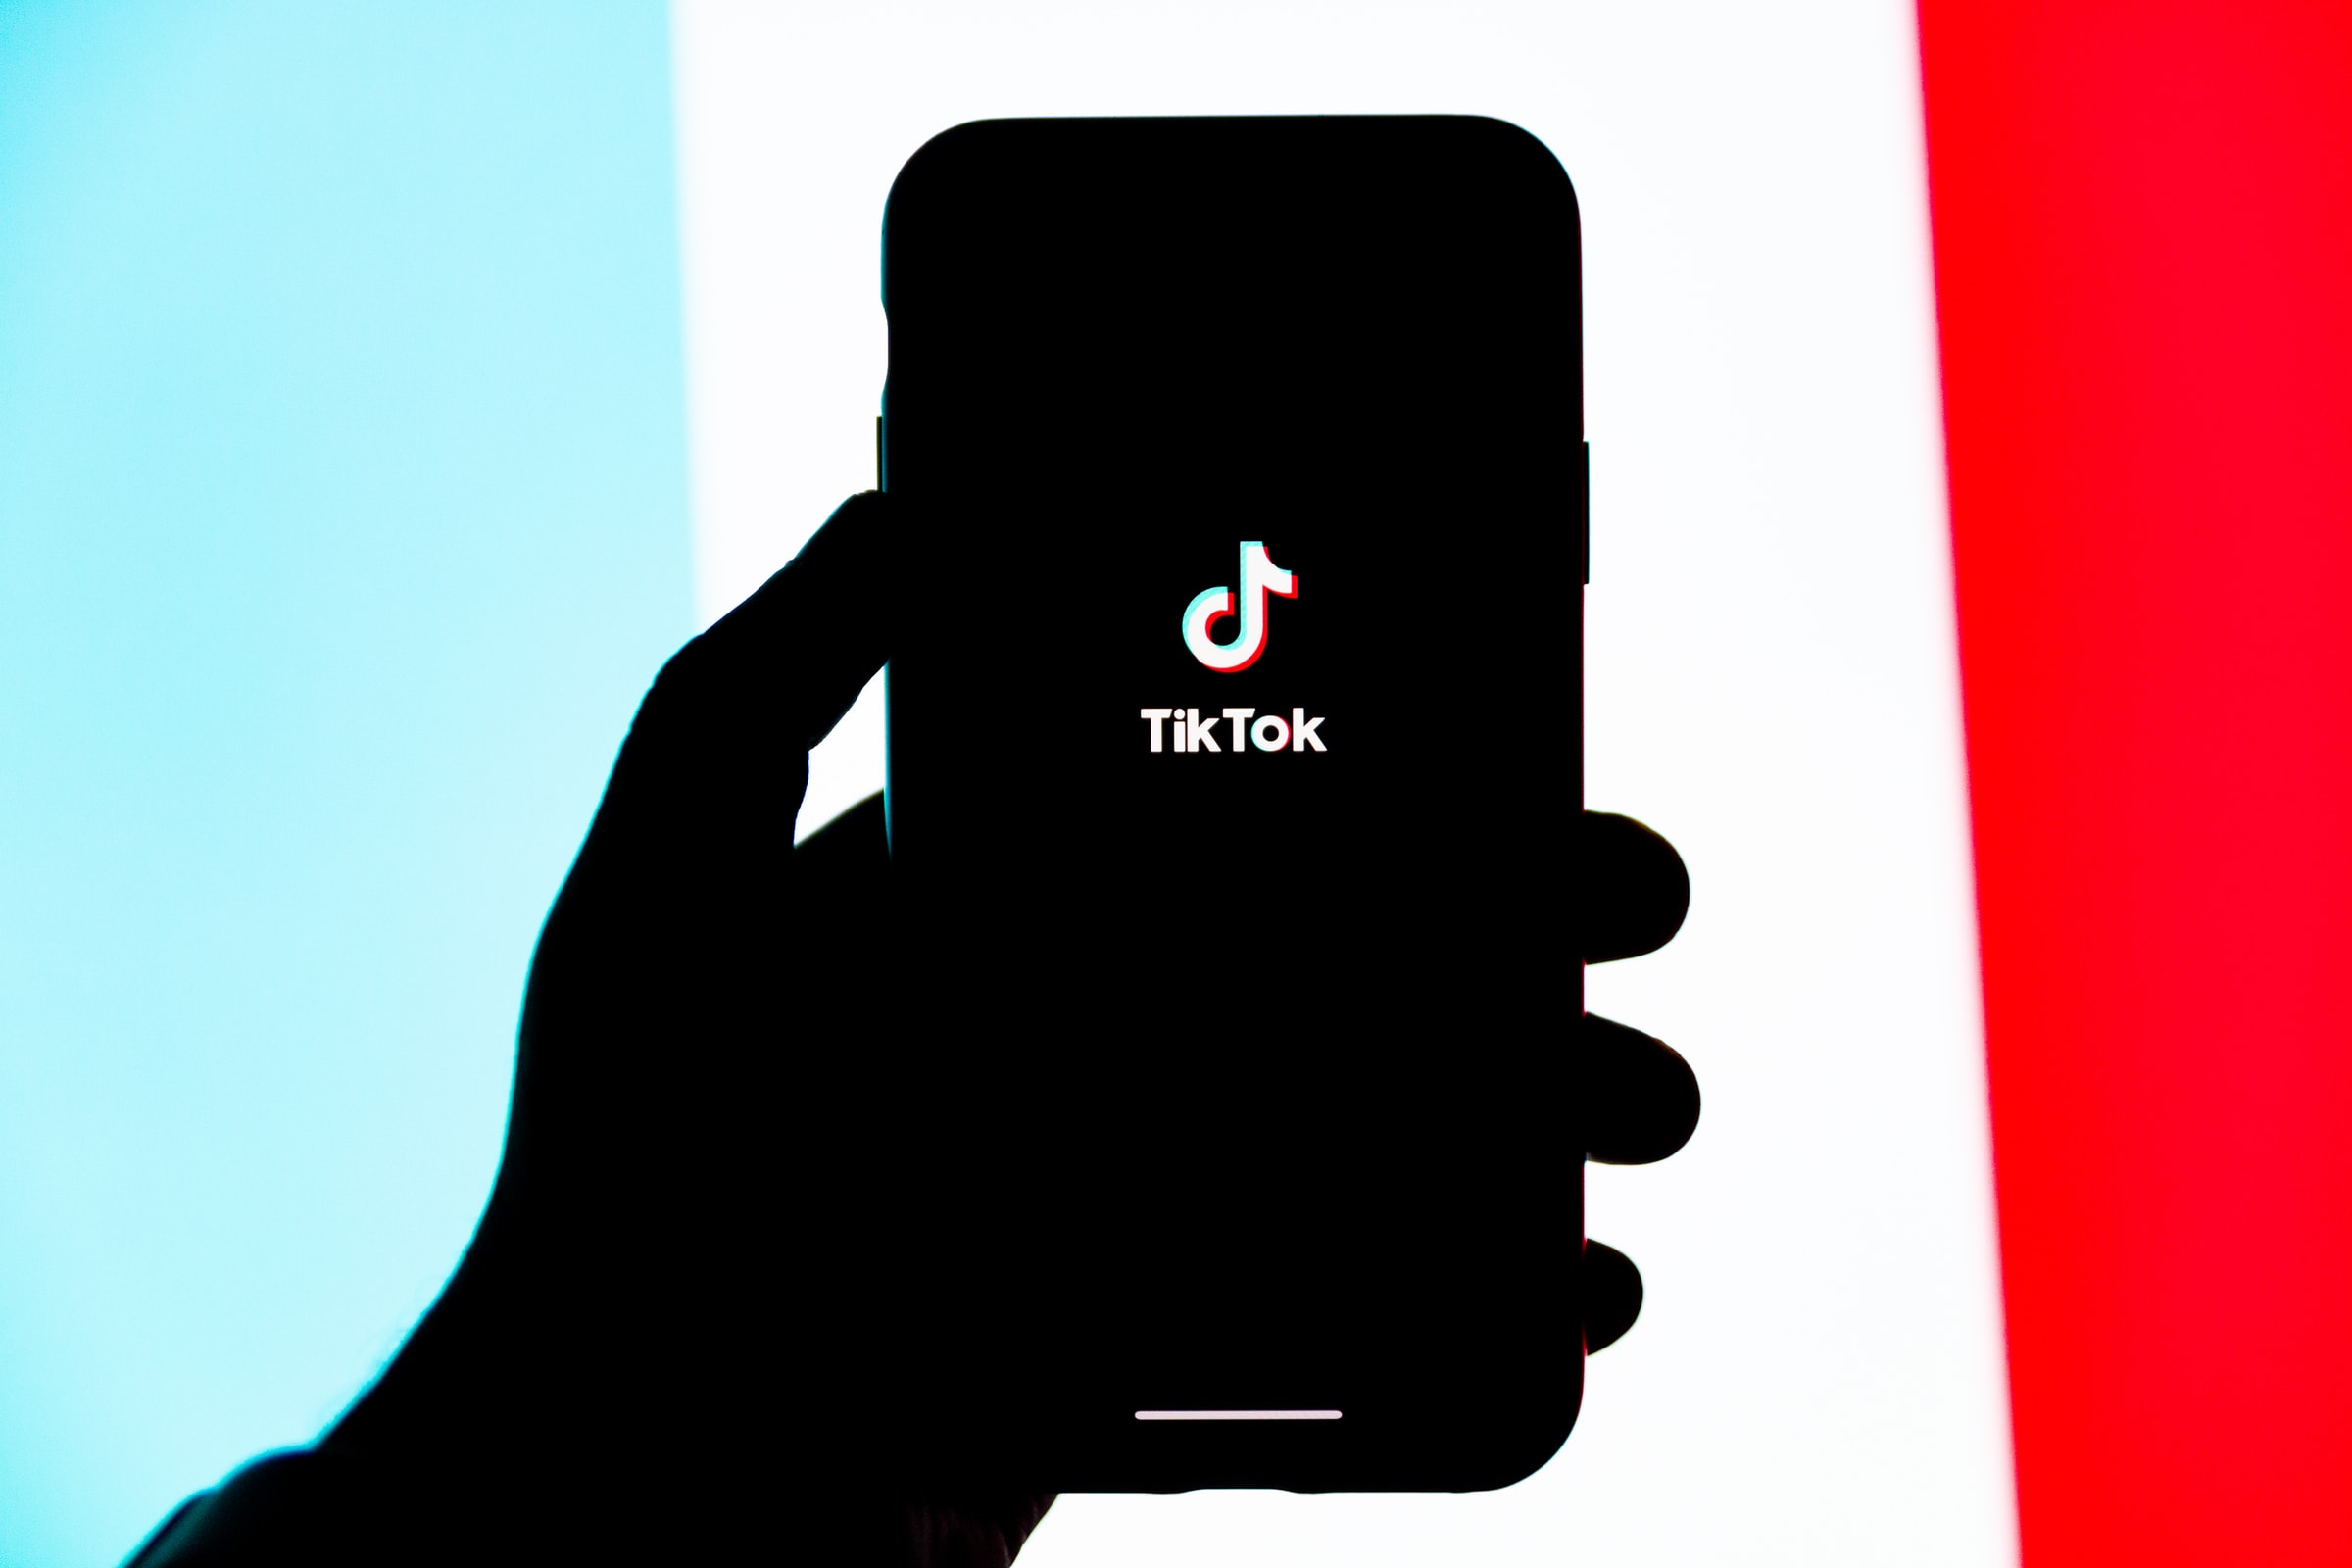 Share Your Experience: Children and Youth Safety on TikTok